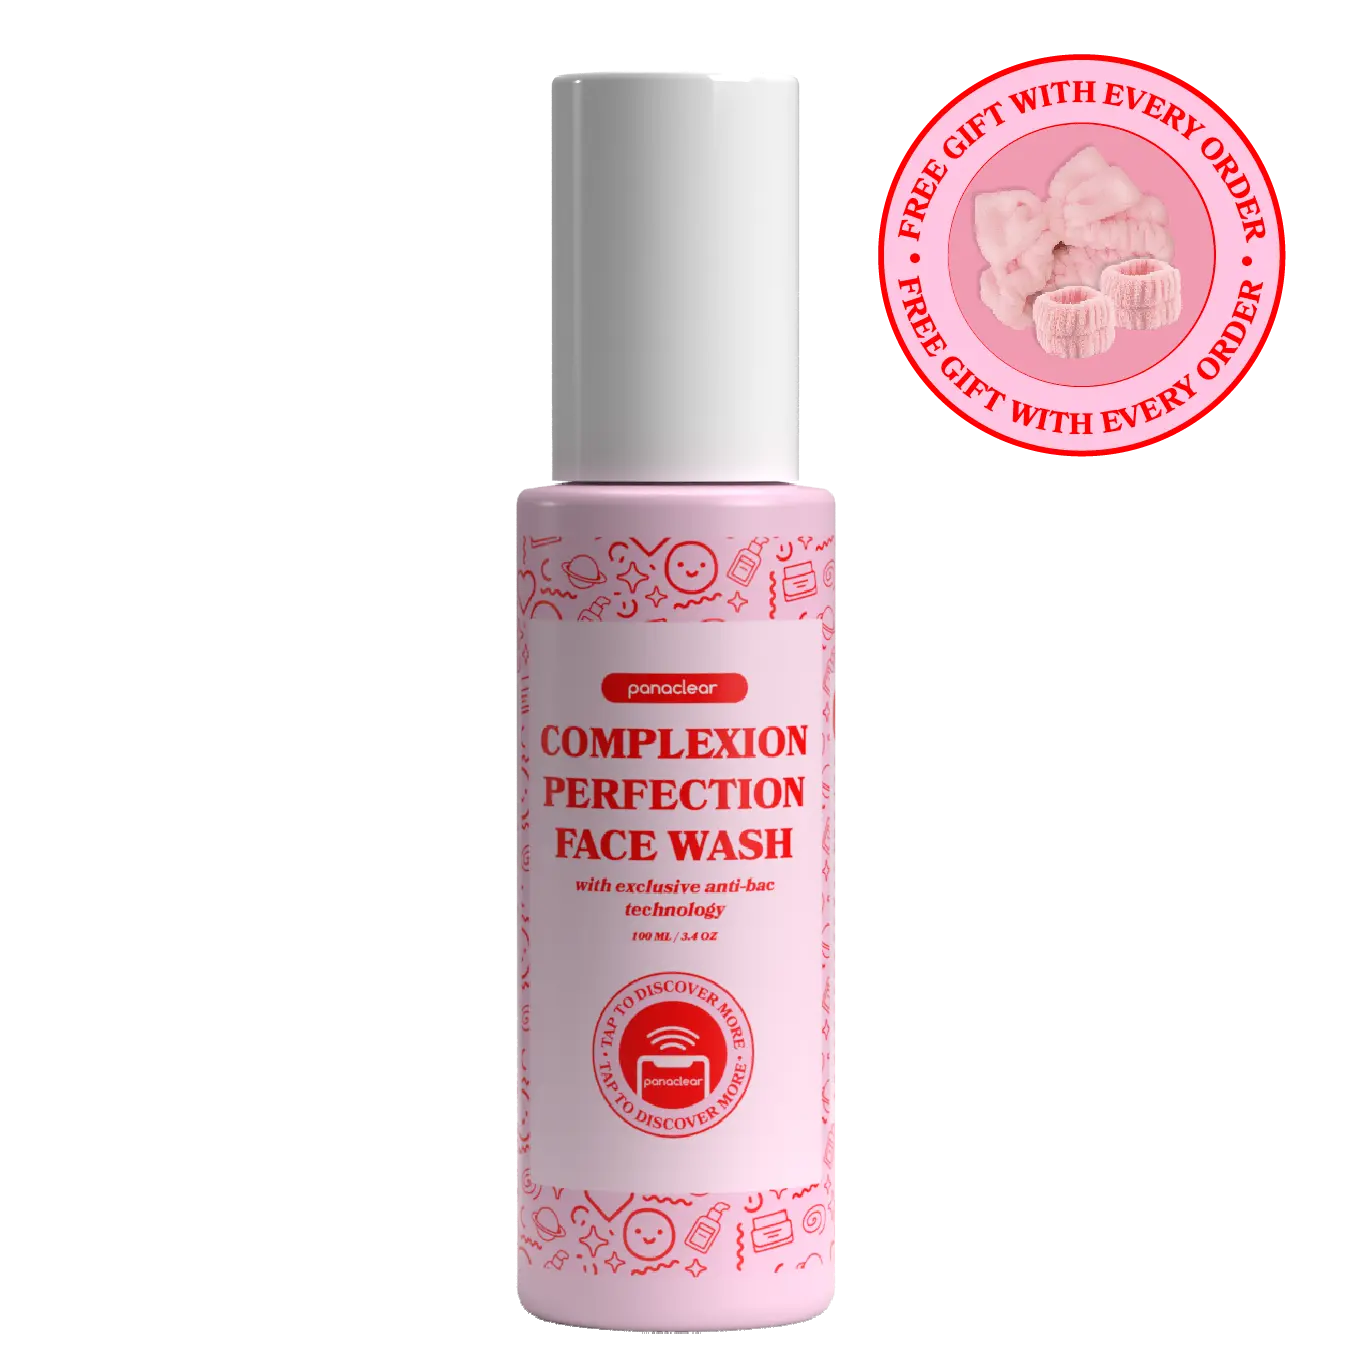 Complexion Perfection Face Wash